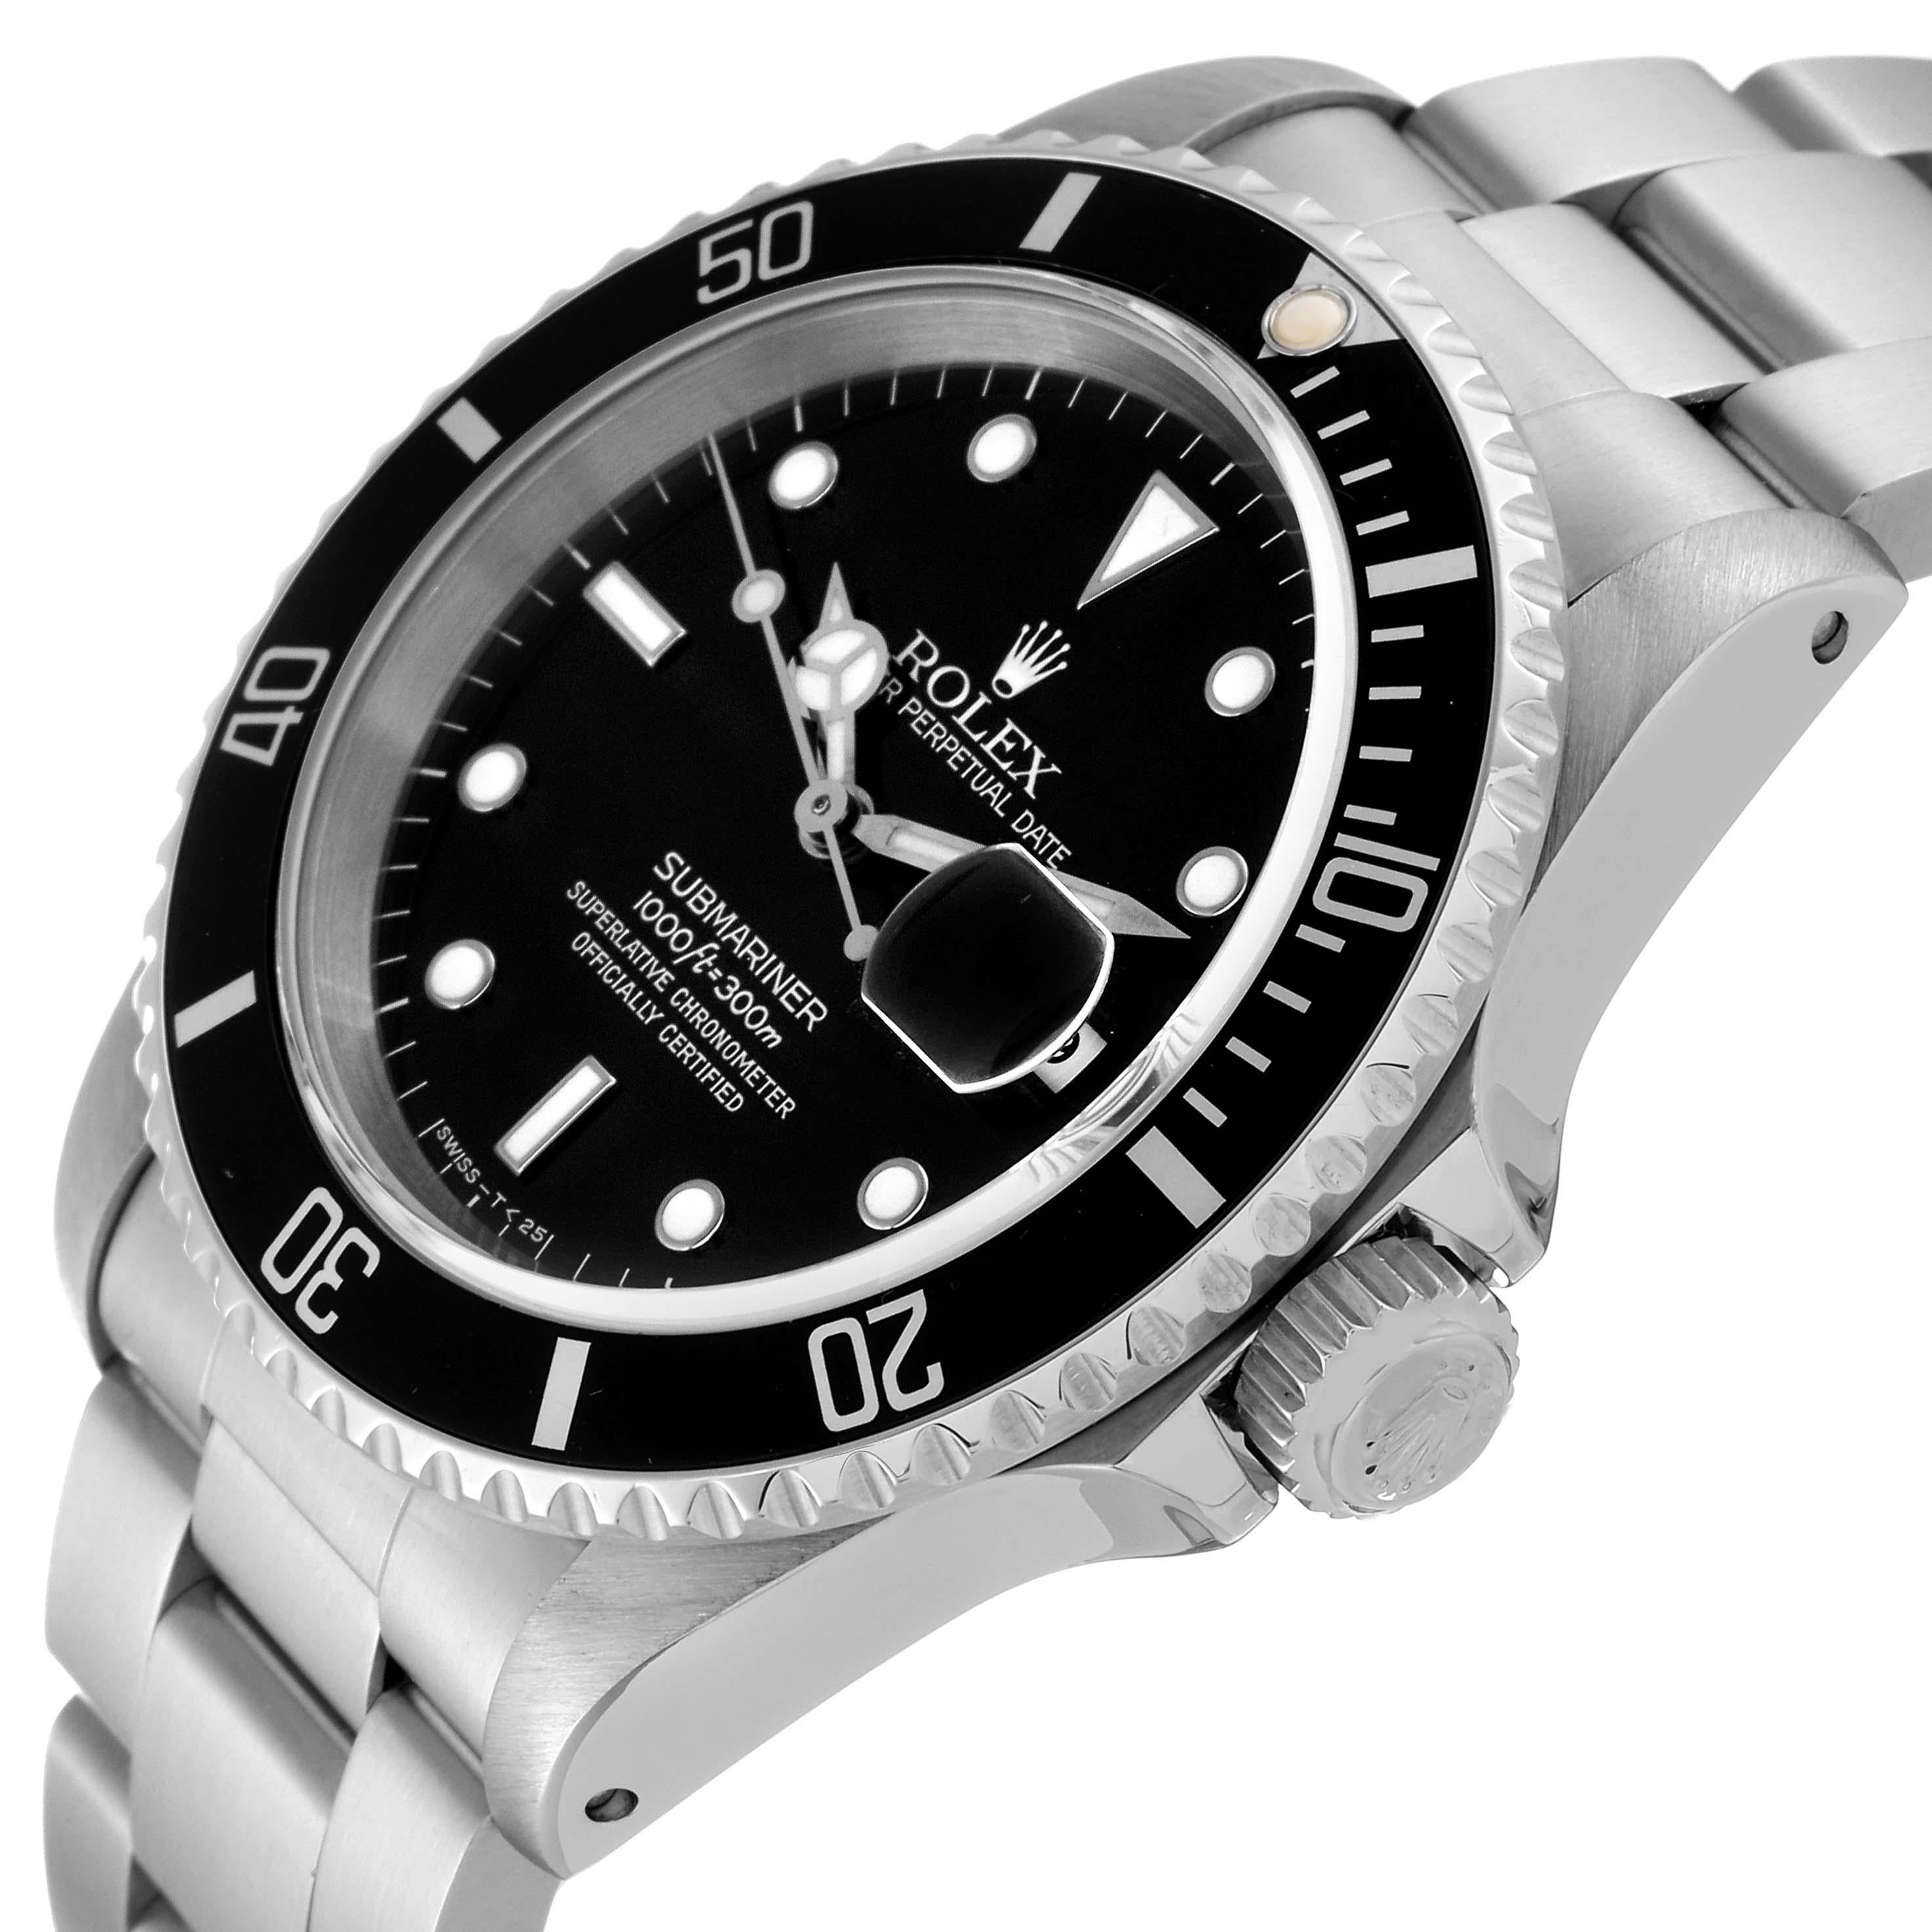 Rolex Submariner Date Black Frosted Dial Steel Mens Watch 16610 Box Papers en vente 3